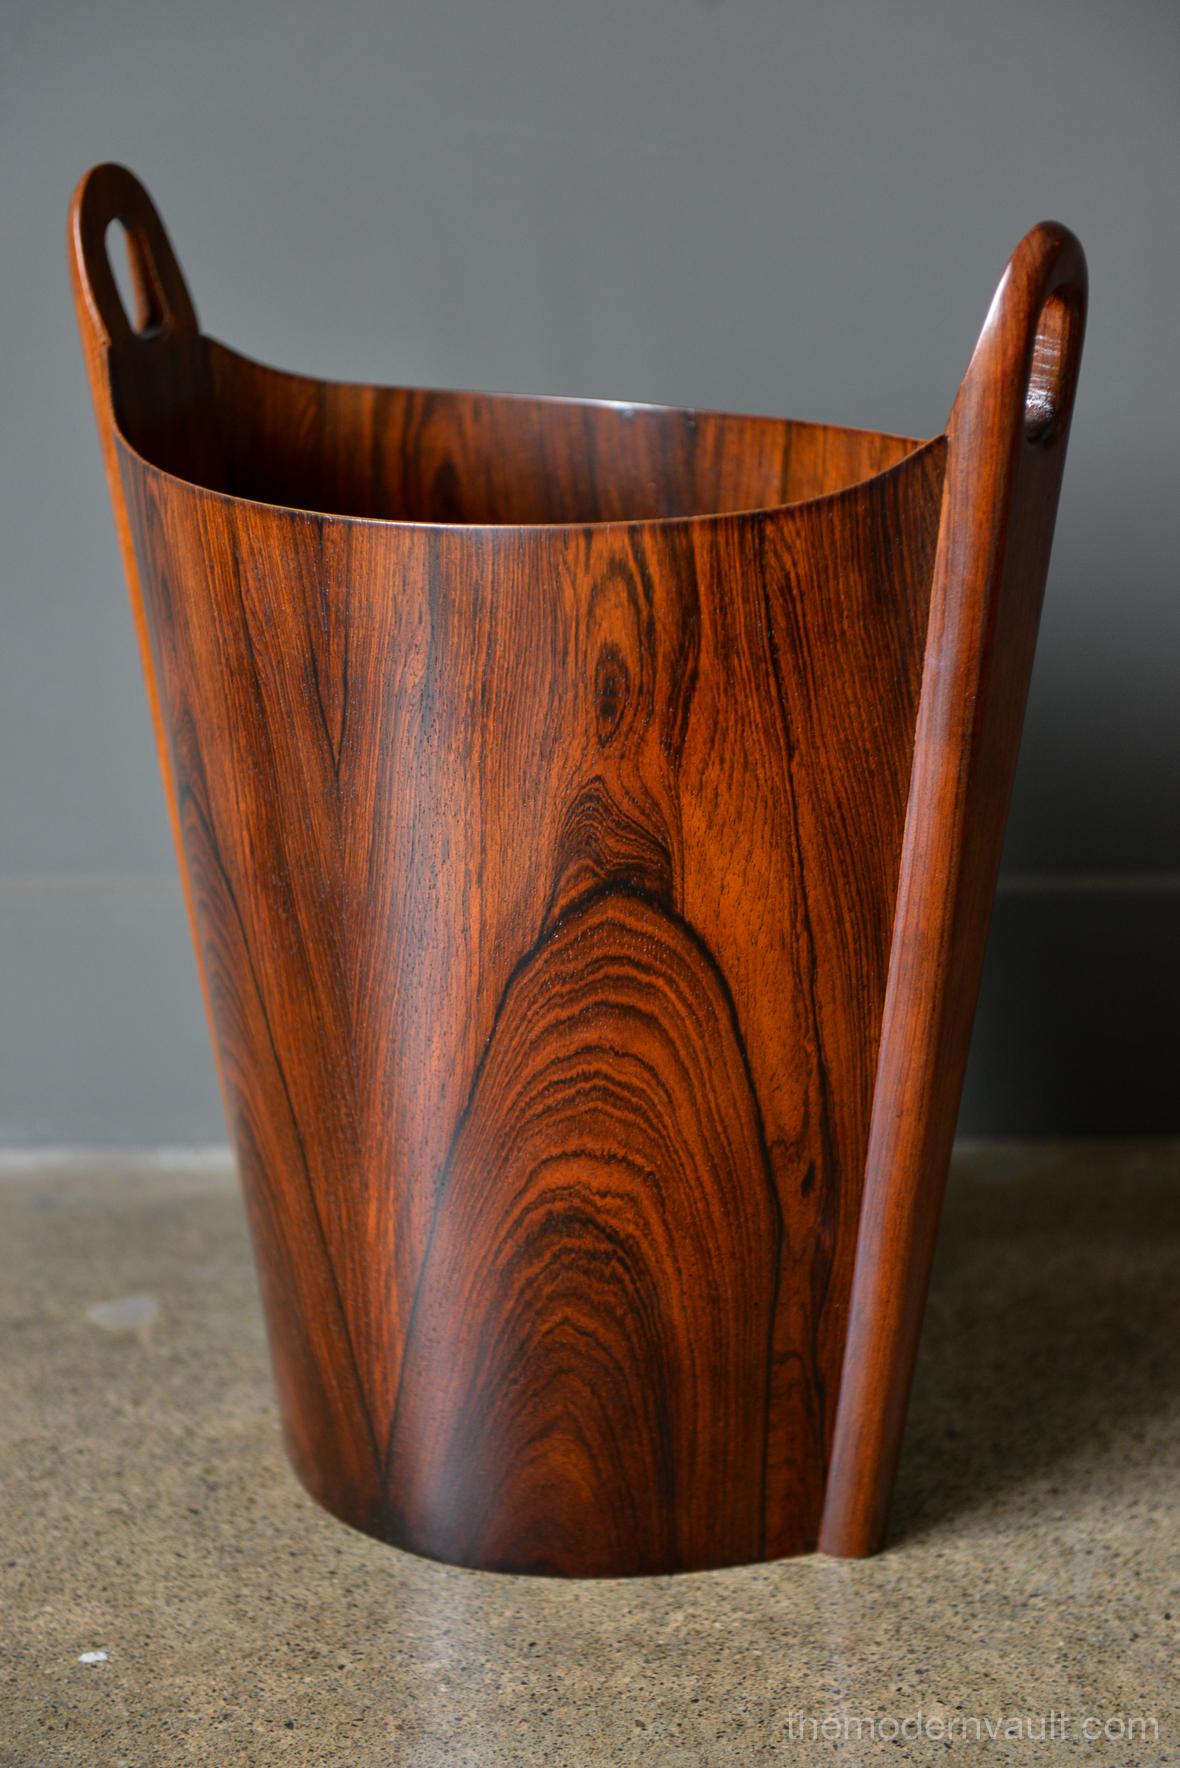 Rosewood wastebasket by Einar Barnes for P.S. Heggen, circa 1965. Restored to perfect condition with beautiful grain.

Measures H 17.5 in. x W 15.5 in. x D 8.5 in.